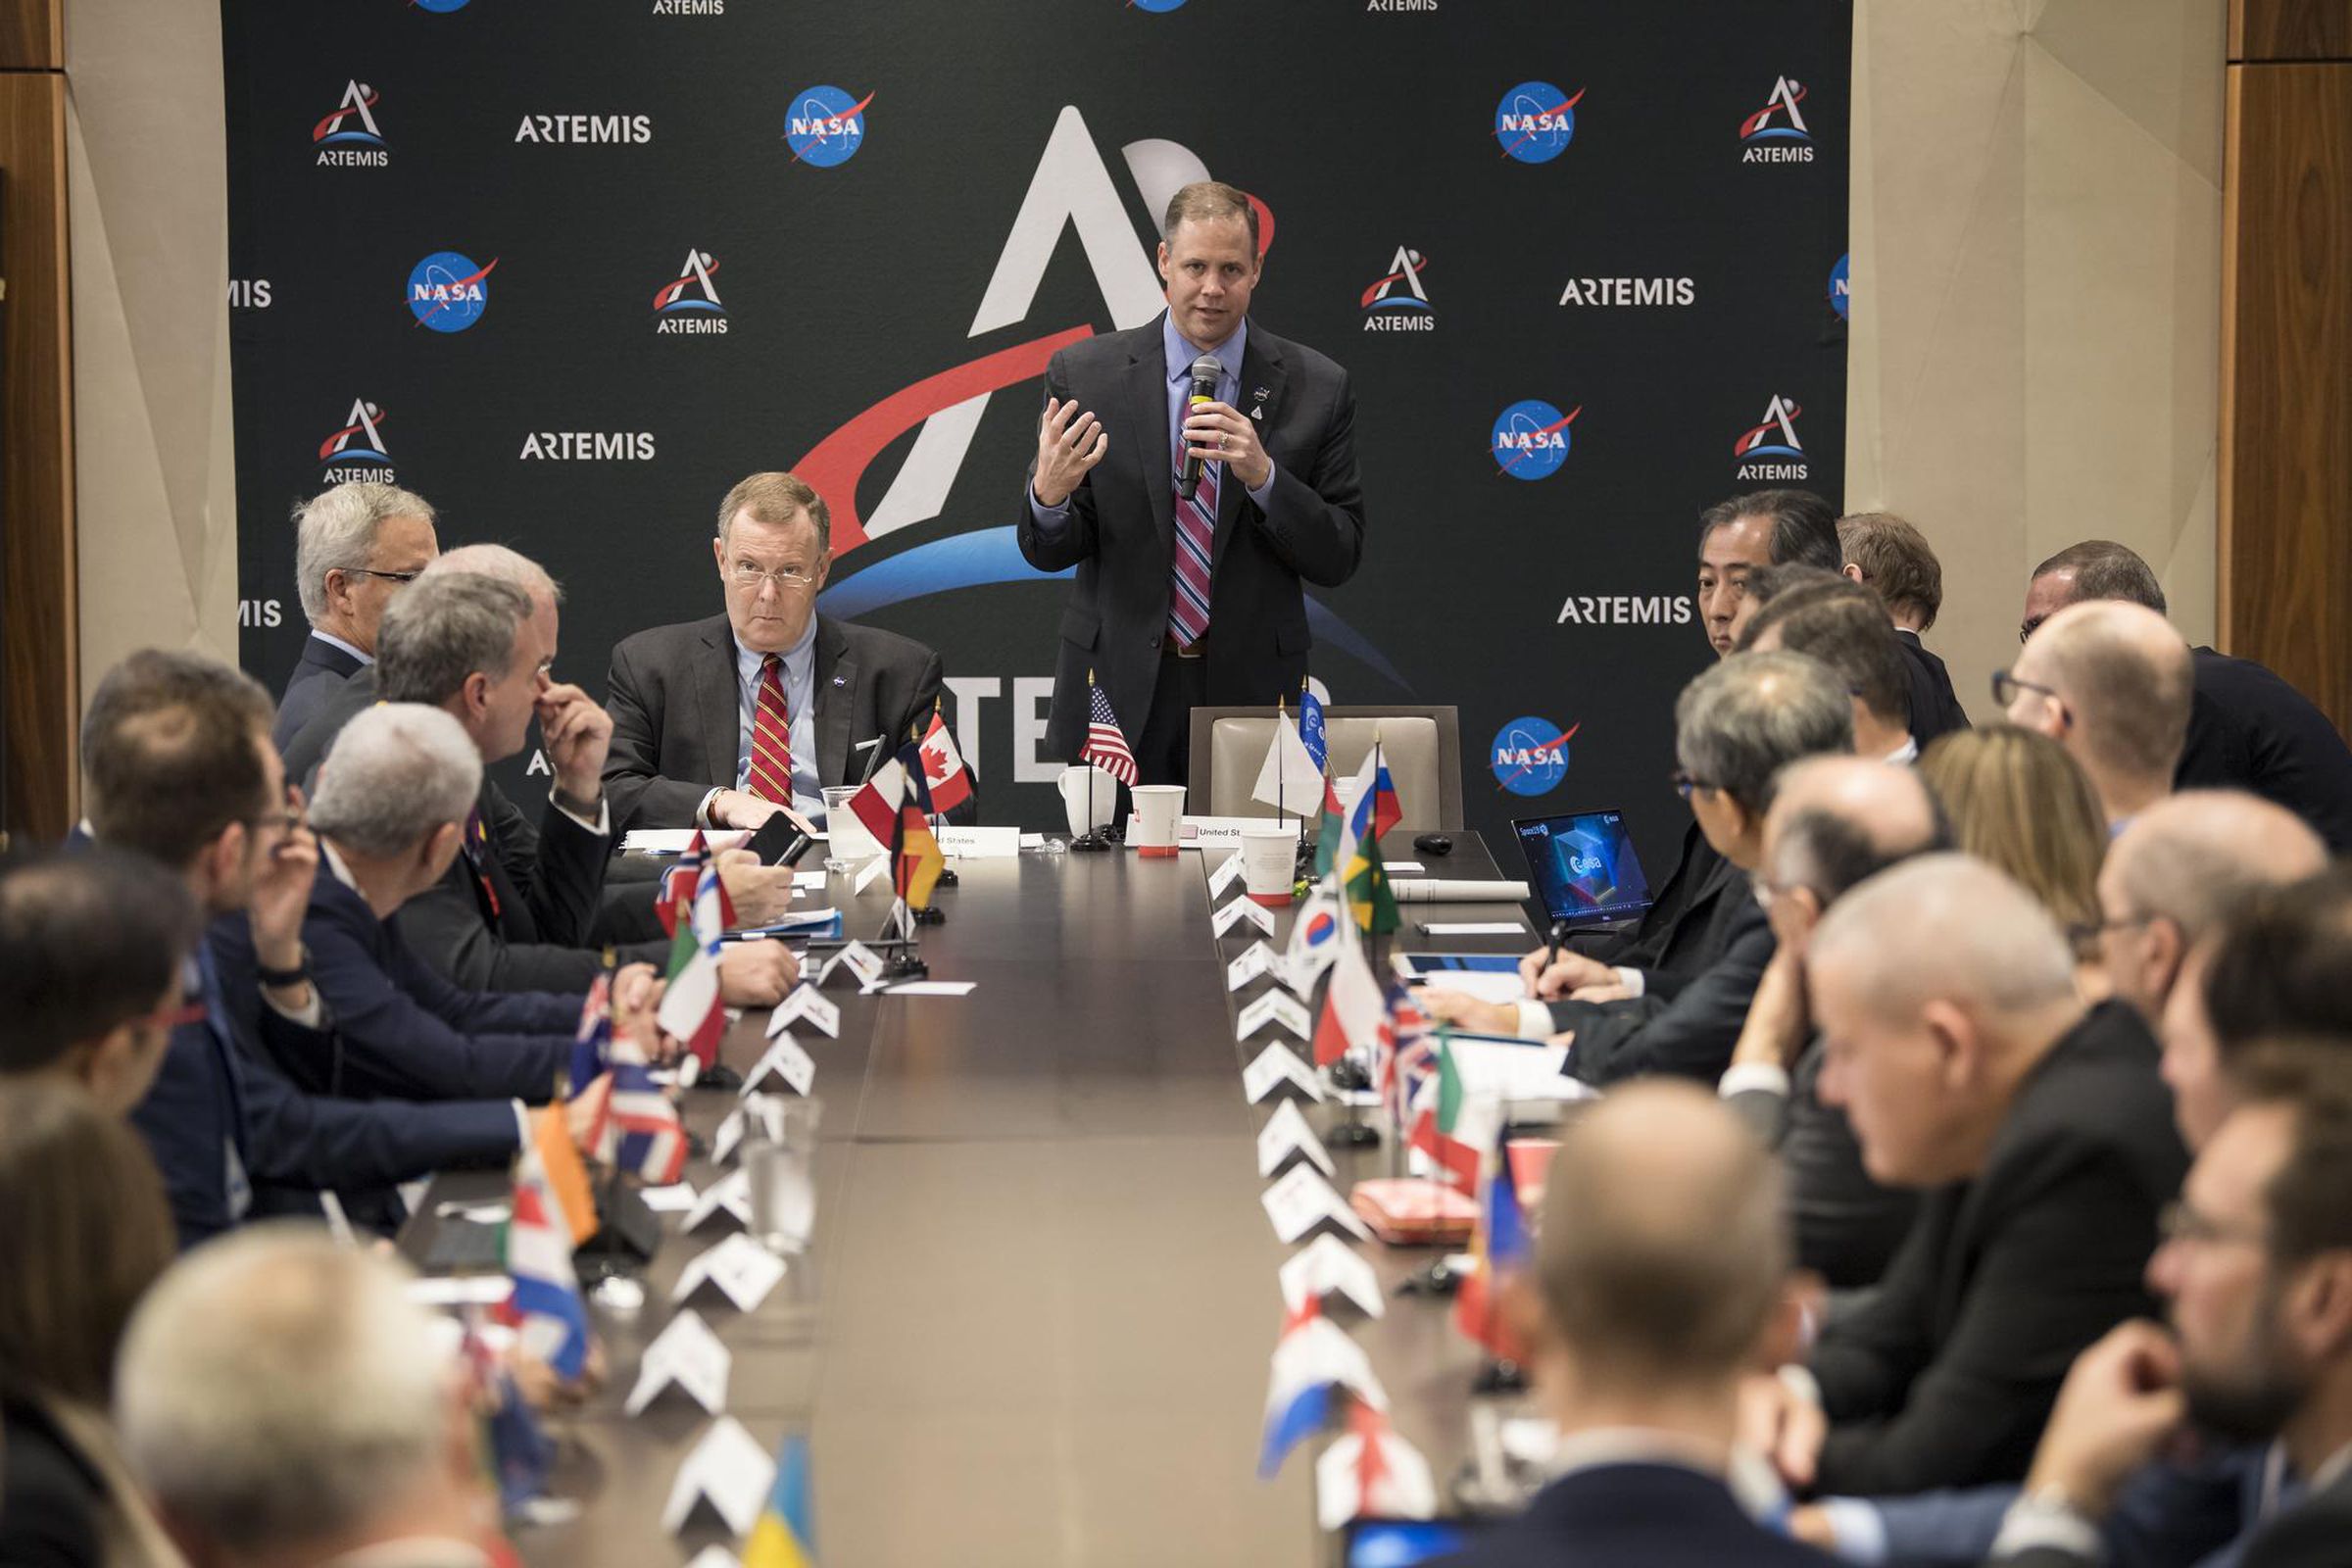 NASA administrator Jim Bridenstine speaking with the heads of the world’s space agencies at last year’s International Astronautical Congress.